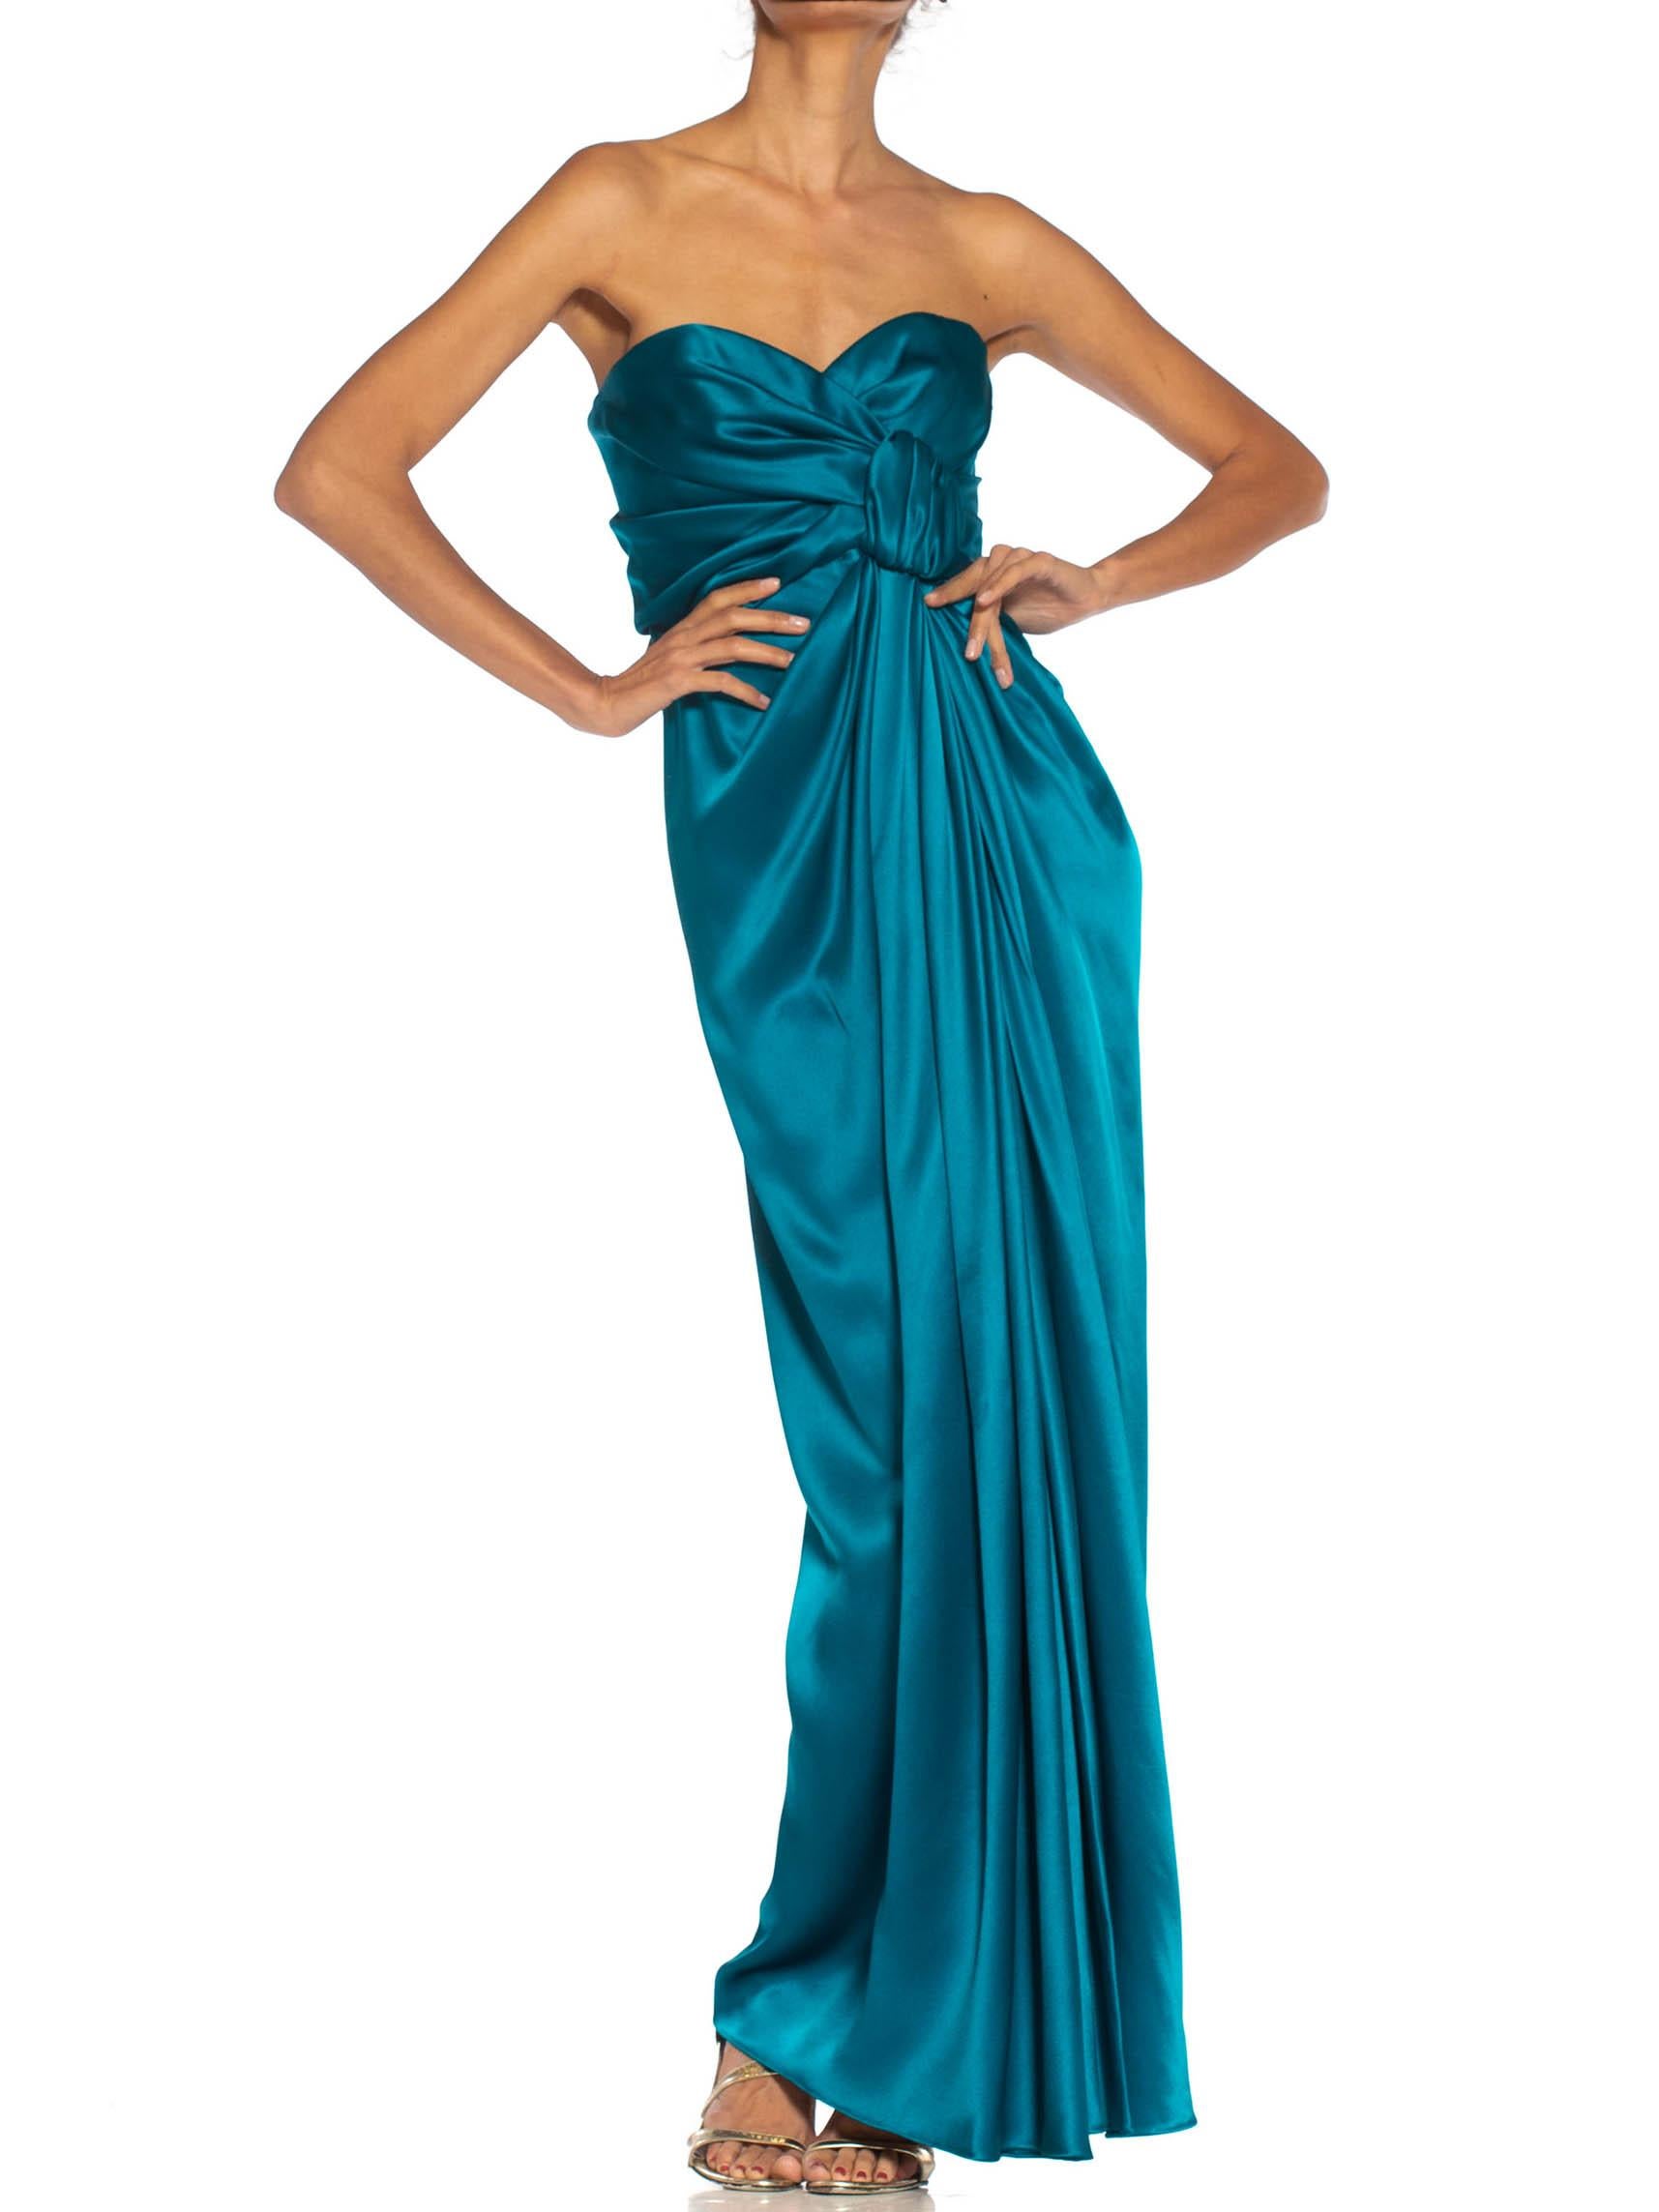 1980S YVES SAINT LAURENT Teal Haute Couture Silk Satin Draped Strpless Gown For Sale 1